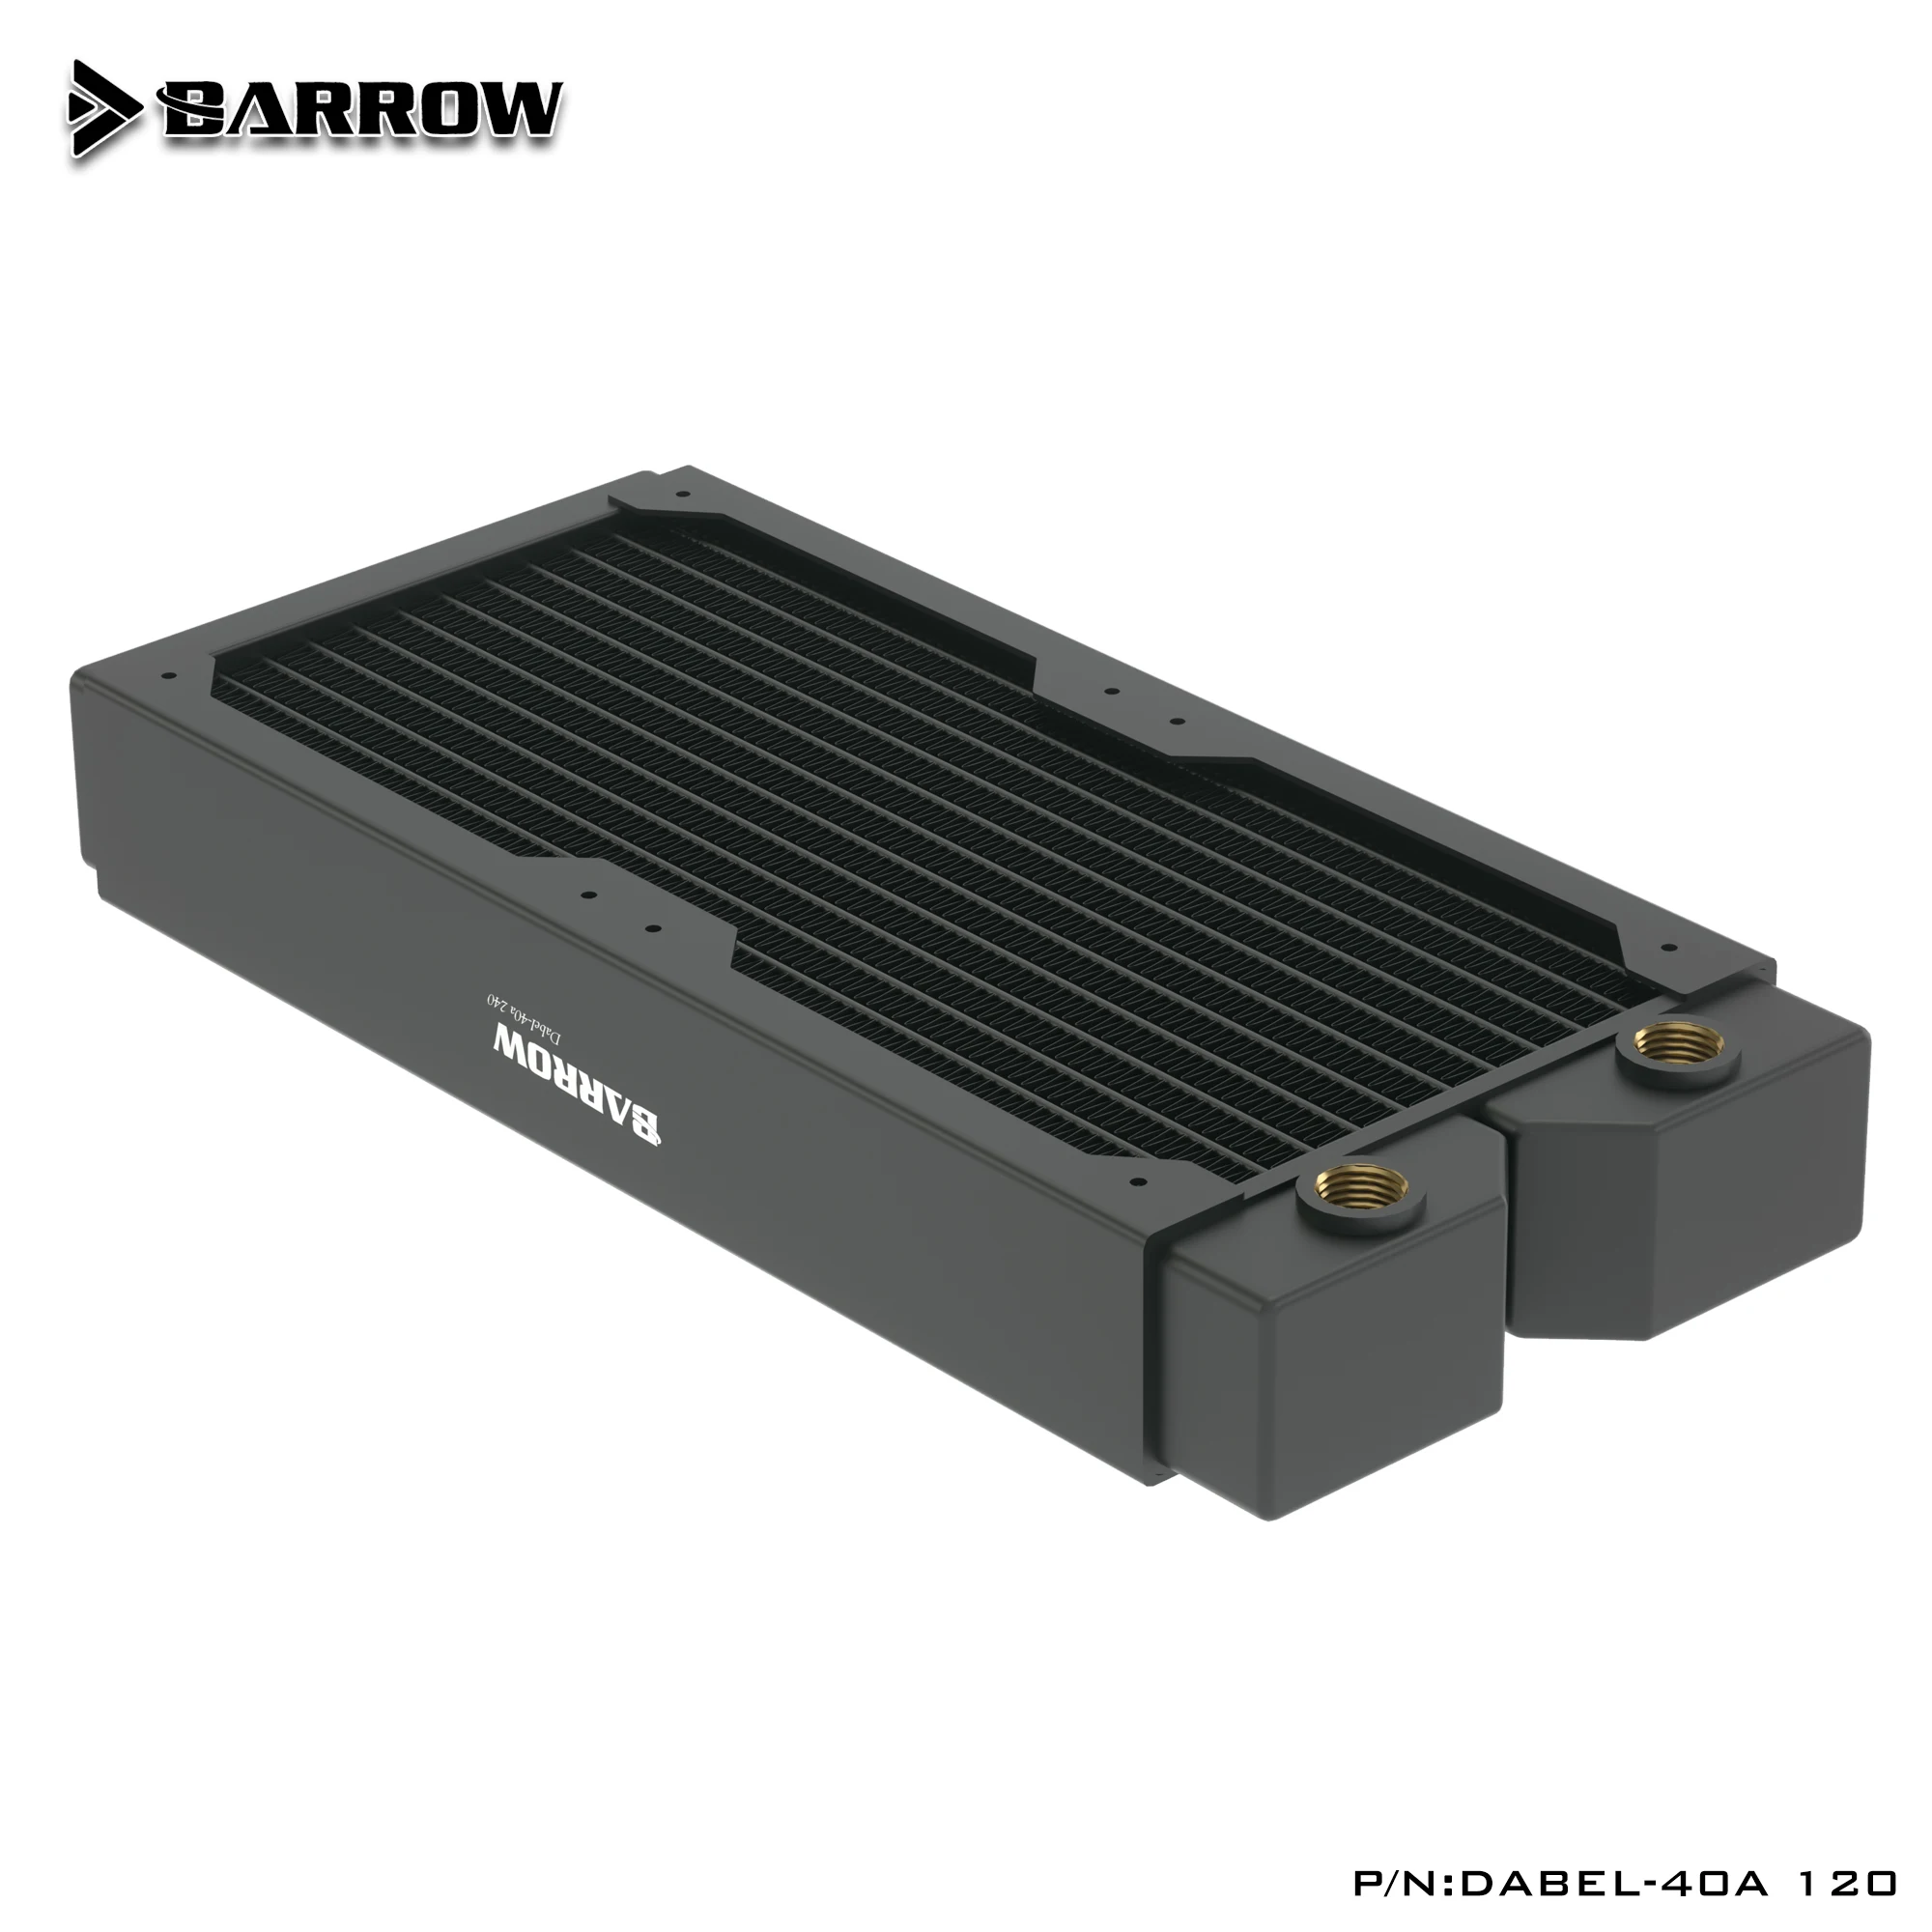 Barrow Dabel-40a Dabel 240mm 2 x 12cm 40mm Height Copper Radiator Water Cooling